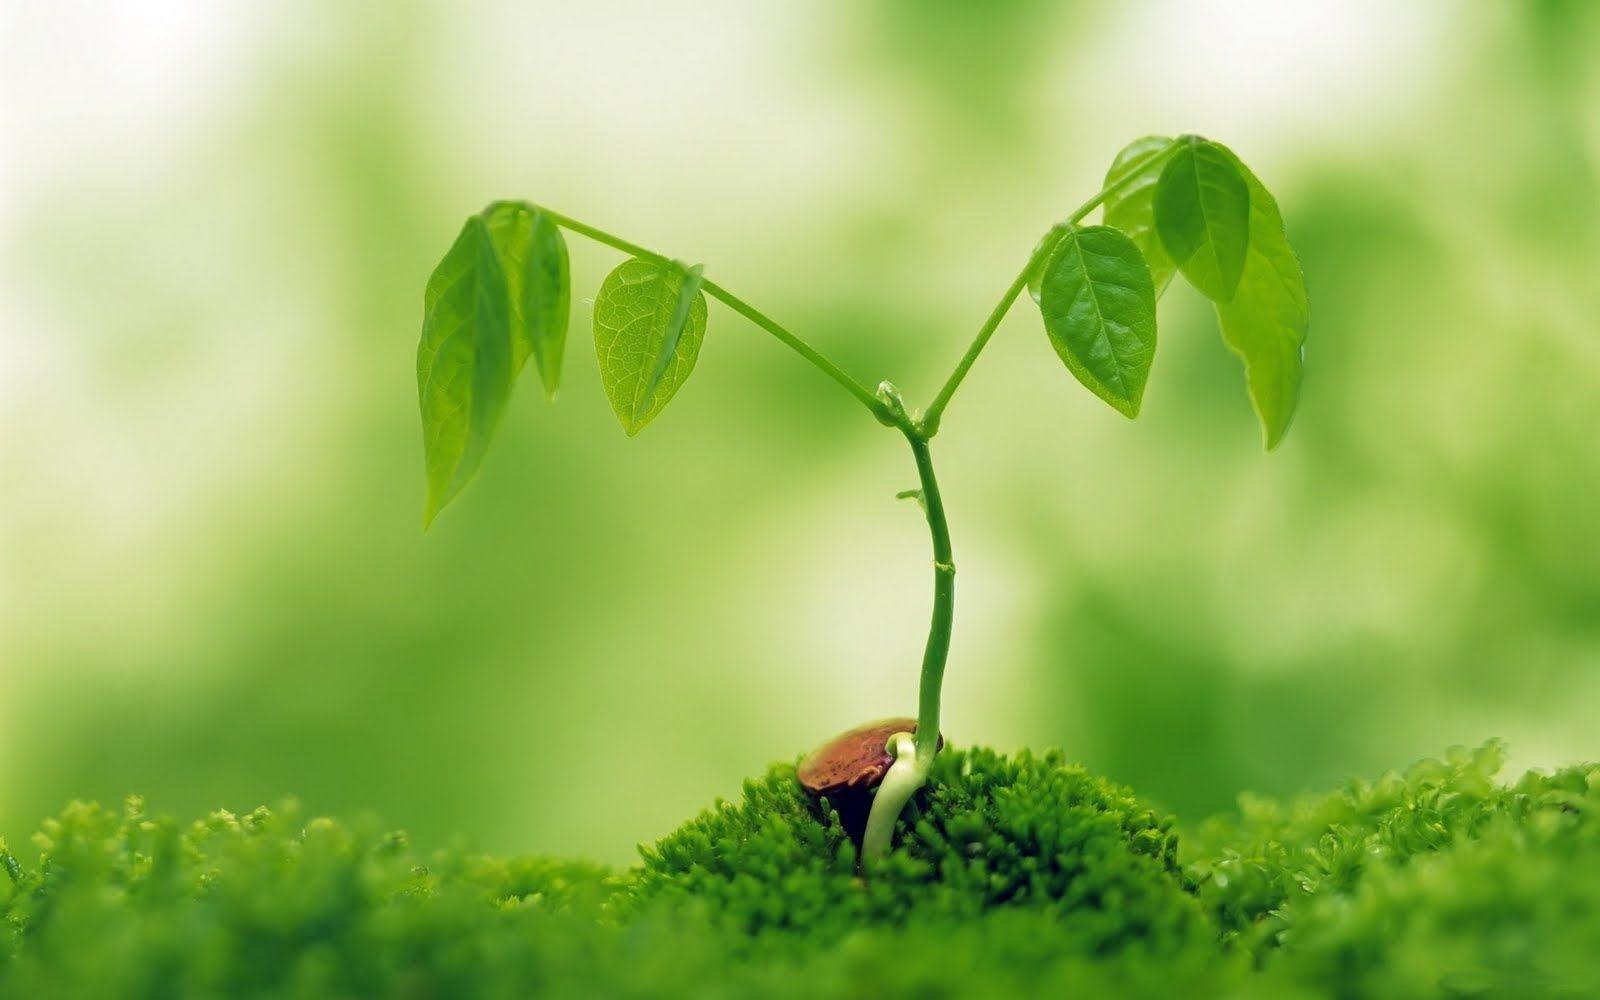 Desktop Green Nature HD Picture Live Hq With Image Free Download